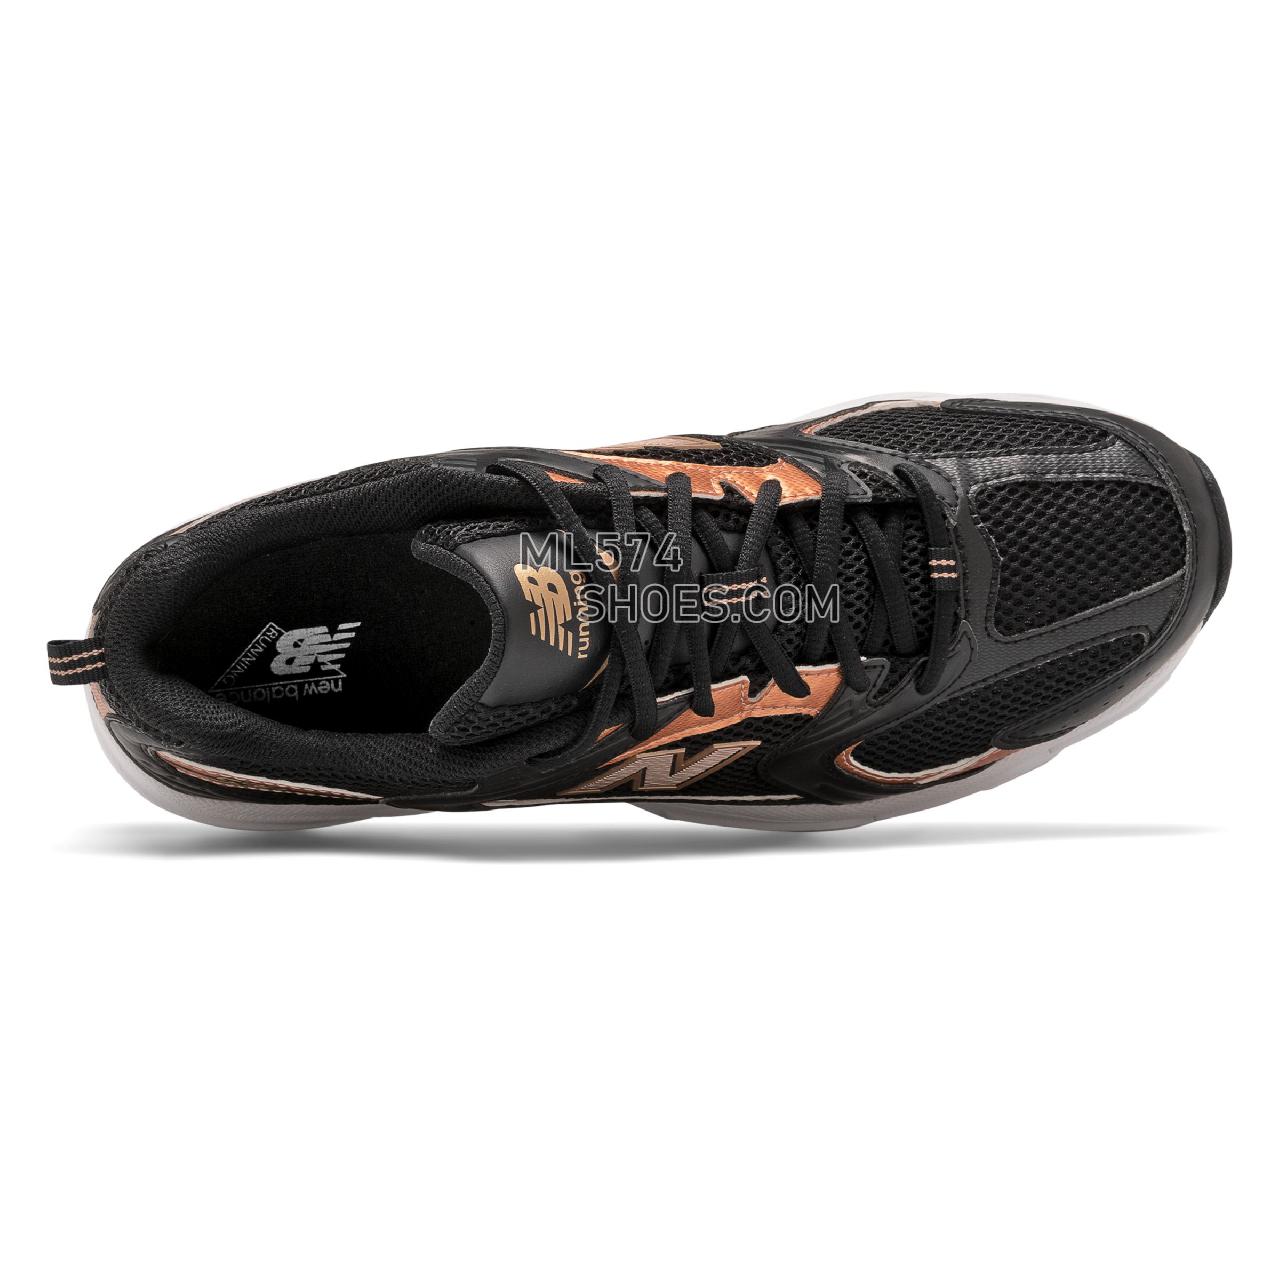 New Balance 530 - Unisex Men's Women's Classic Sneakers - Black with Rose Gold - MR530EMD